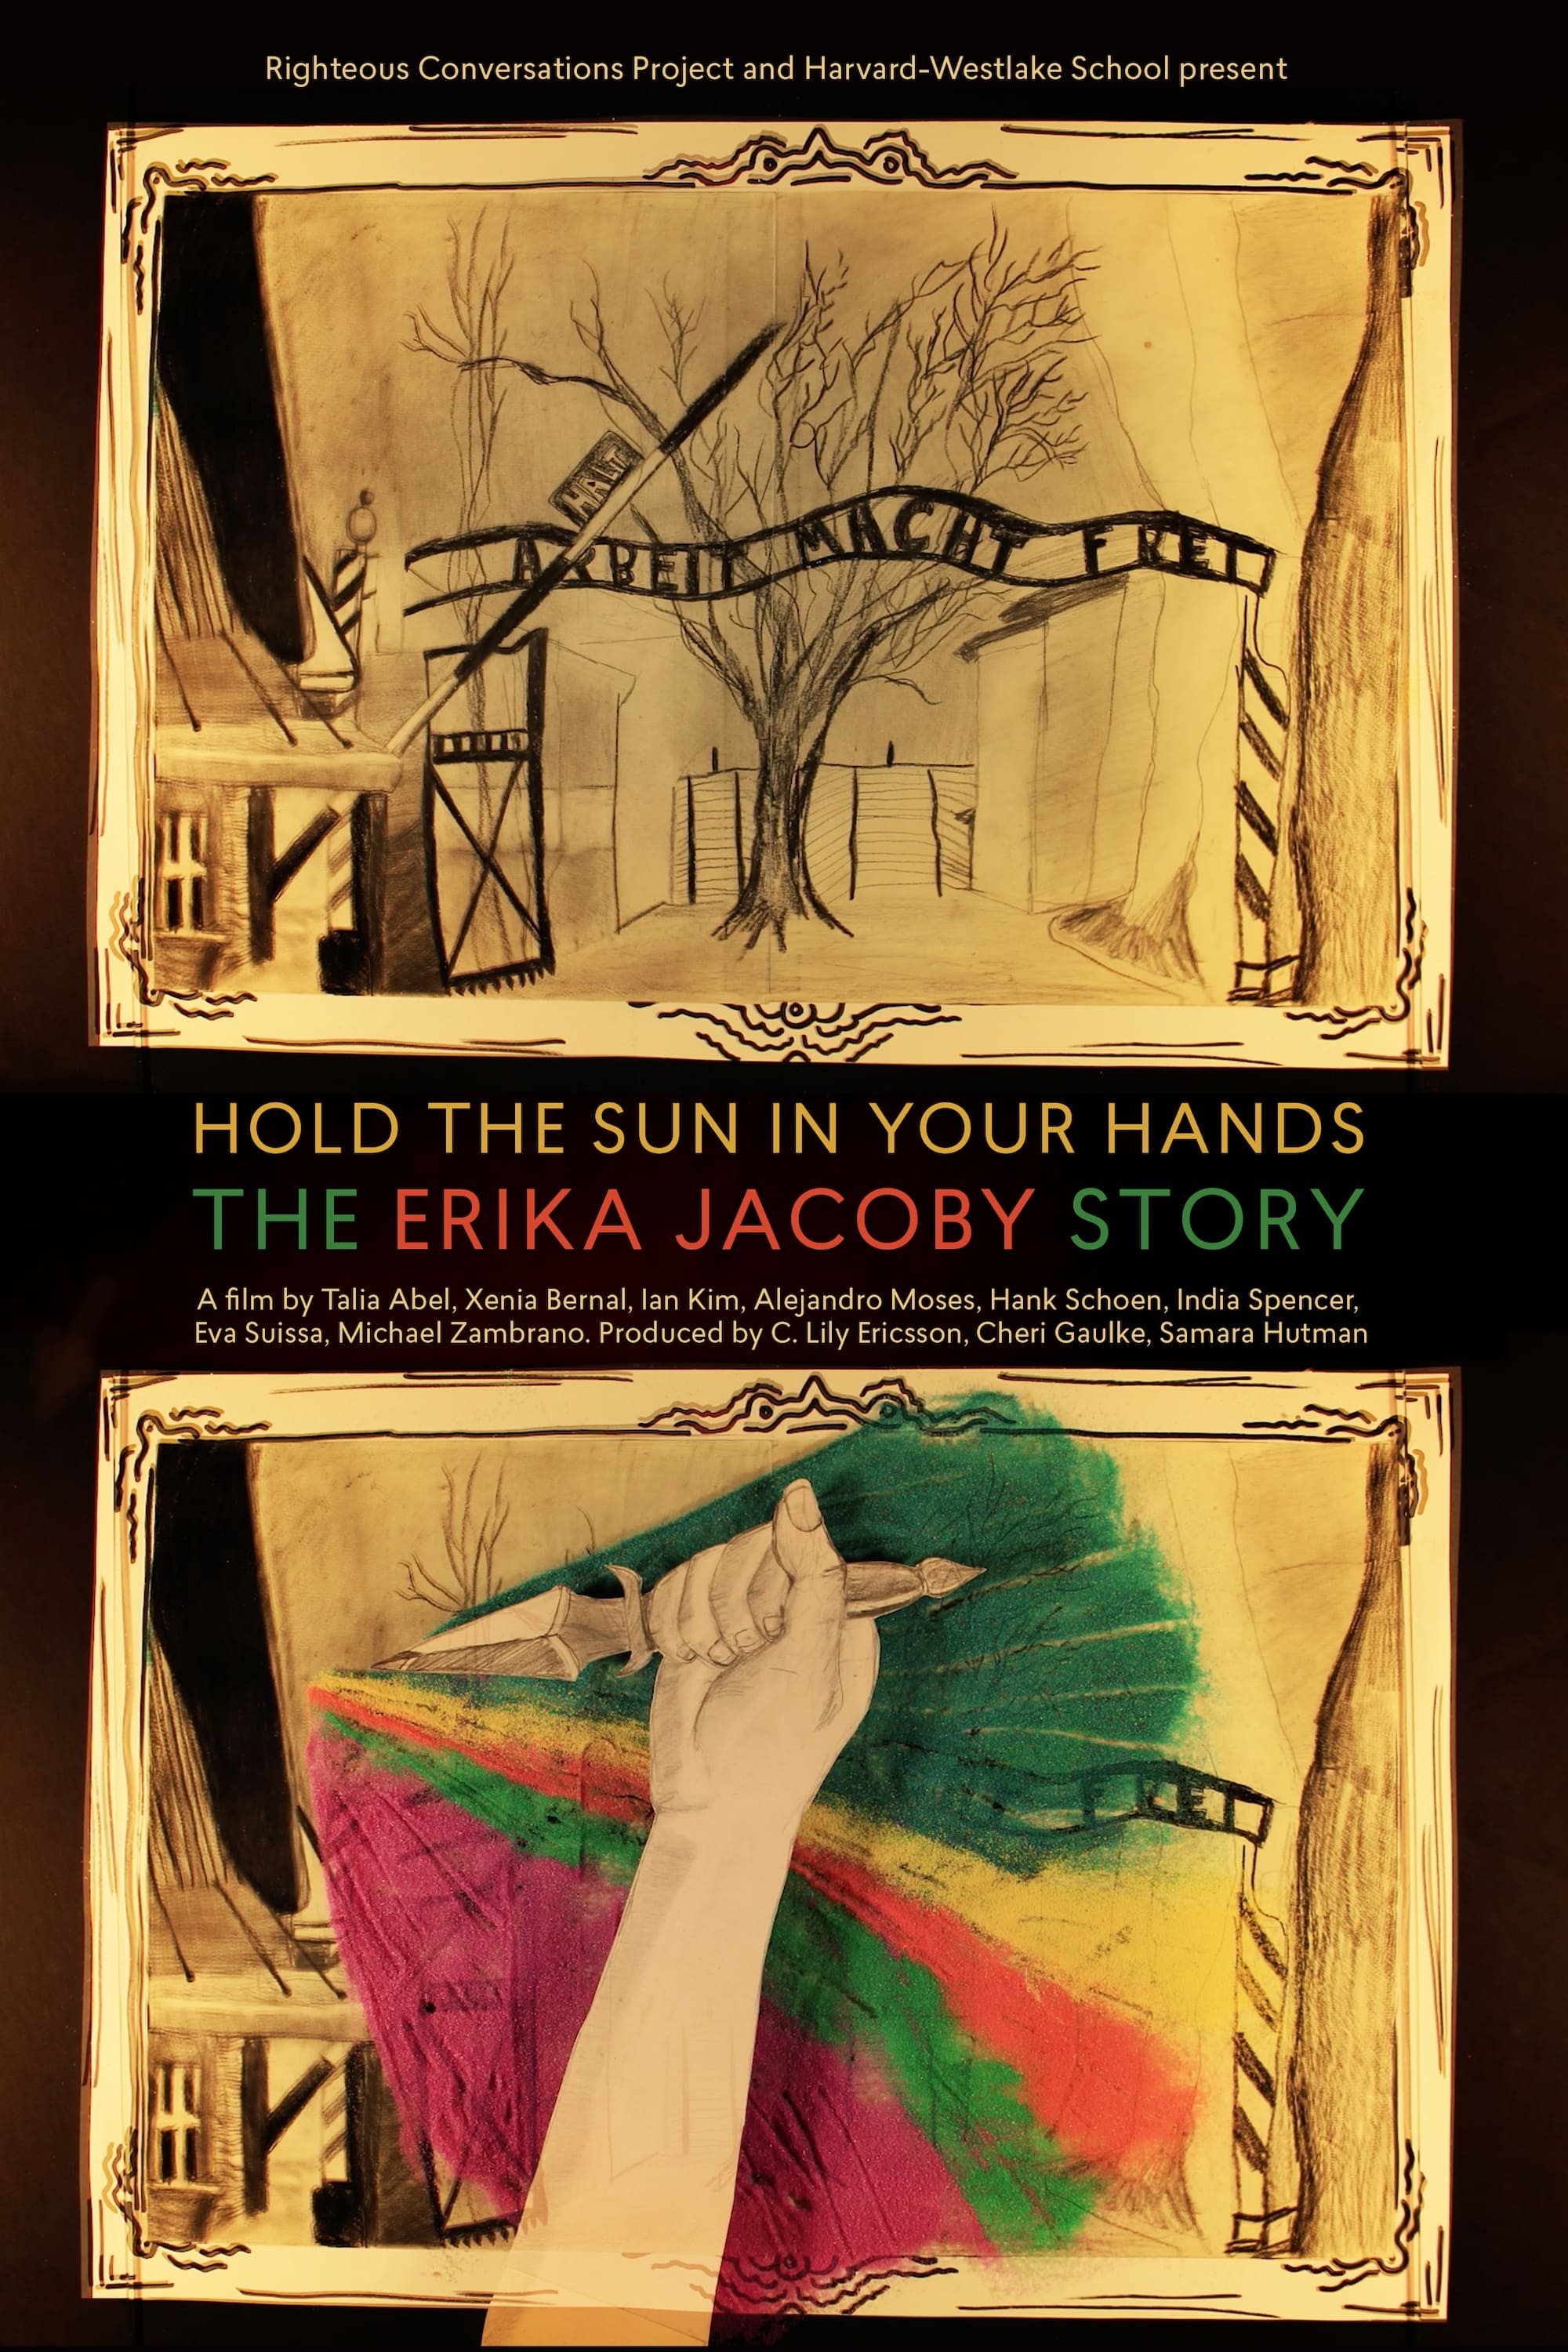 Hold the Sun in Your Hands: The Erika Jacoby Story